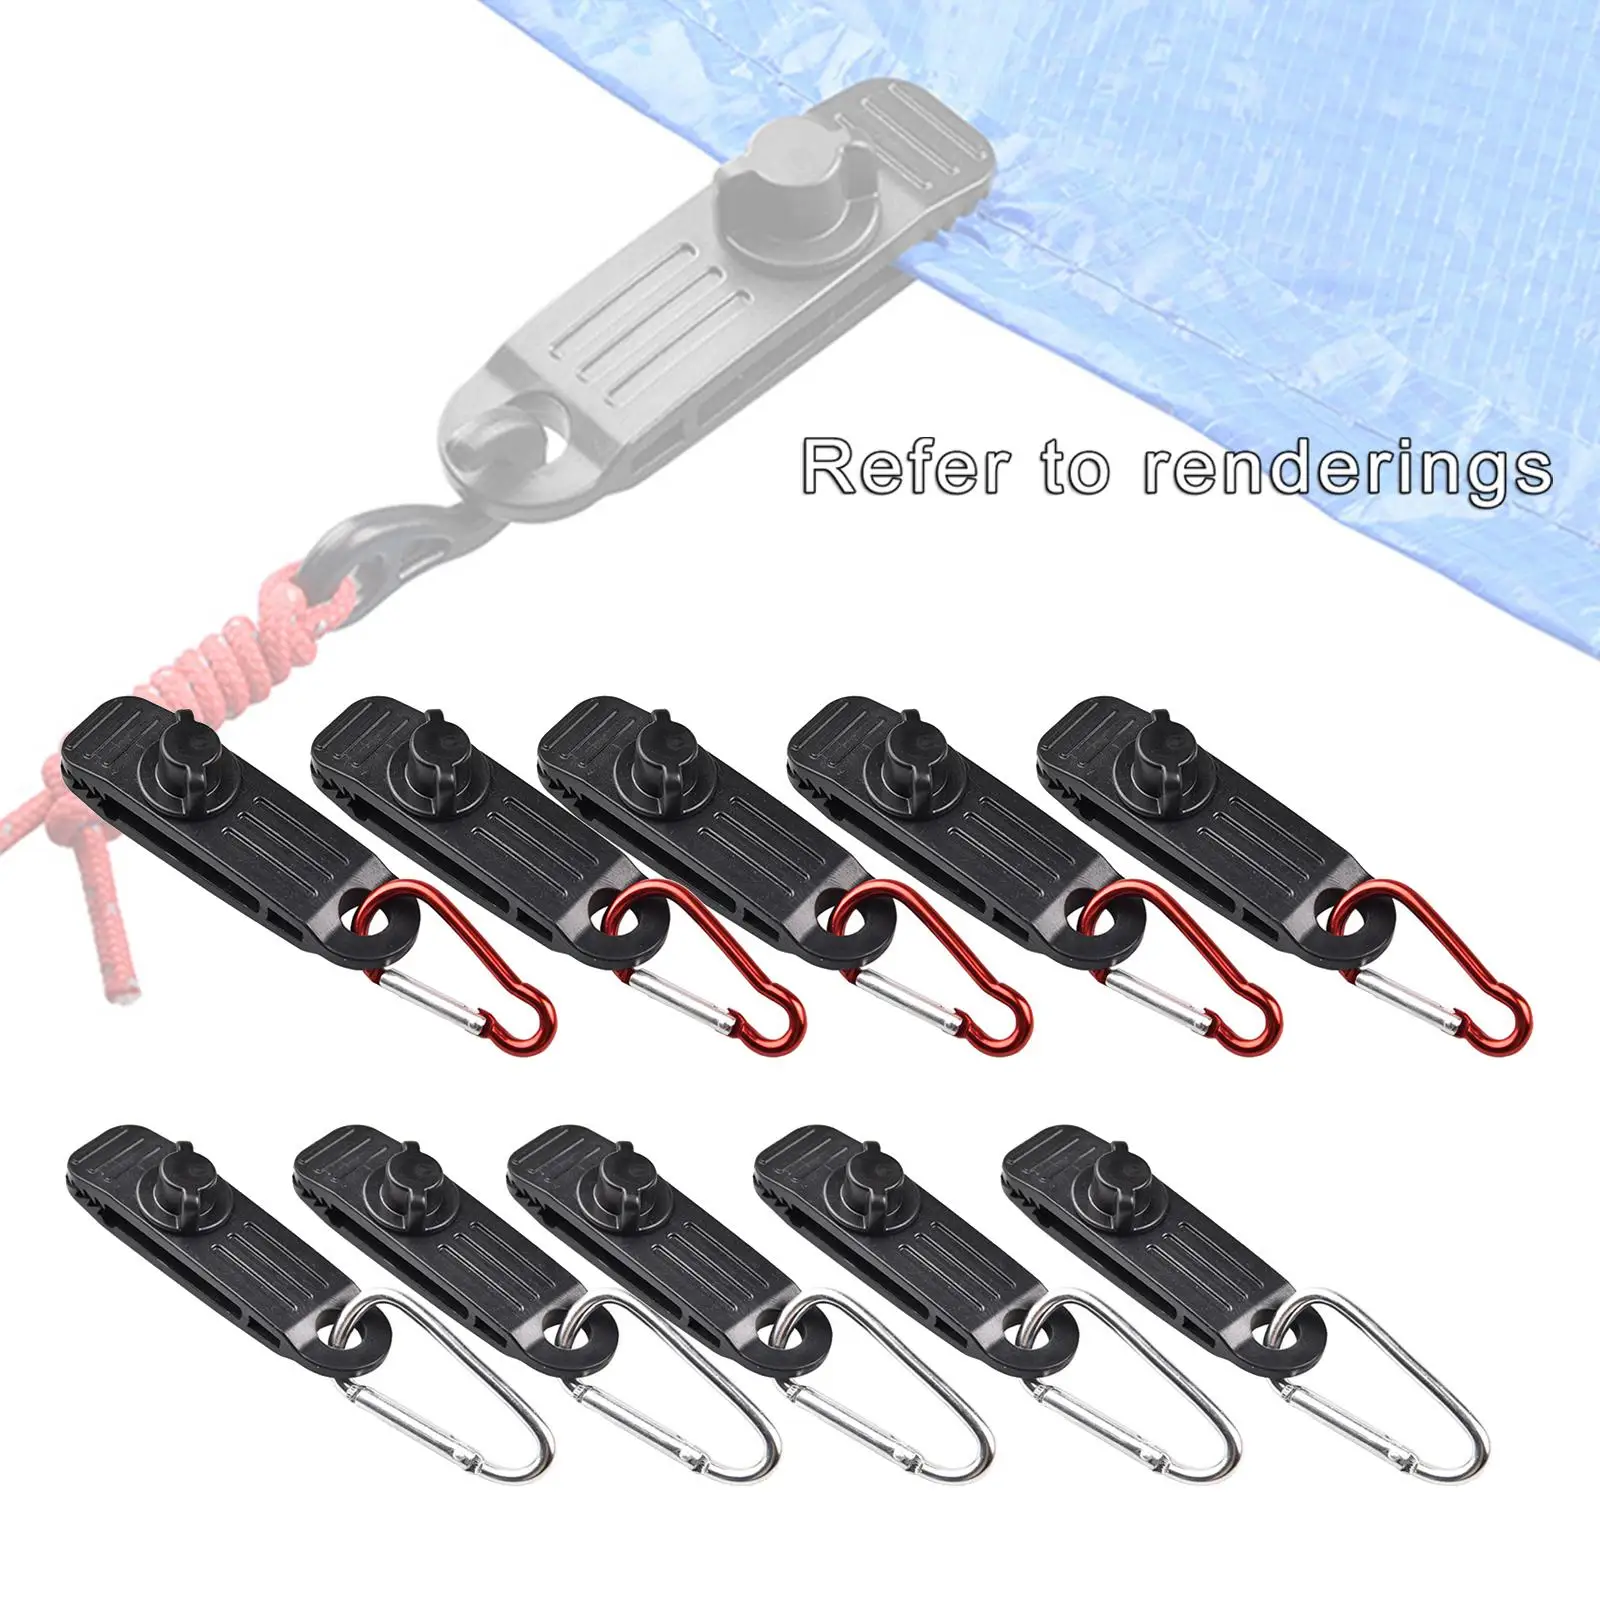 10Pcs Durable Tent Snaps Clamp Awning Fasteners Car Cover Tighten Tarp Clips